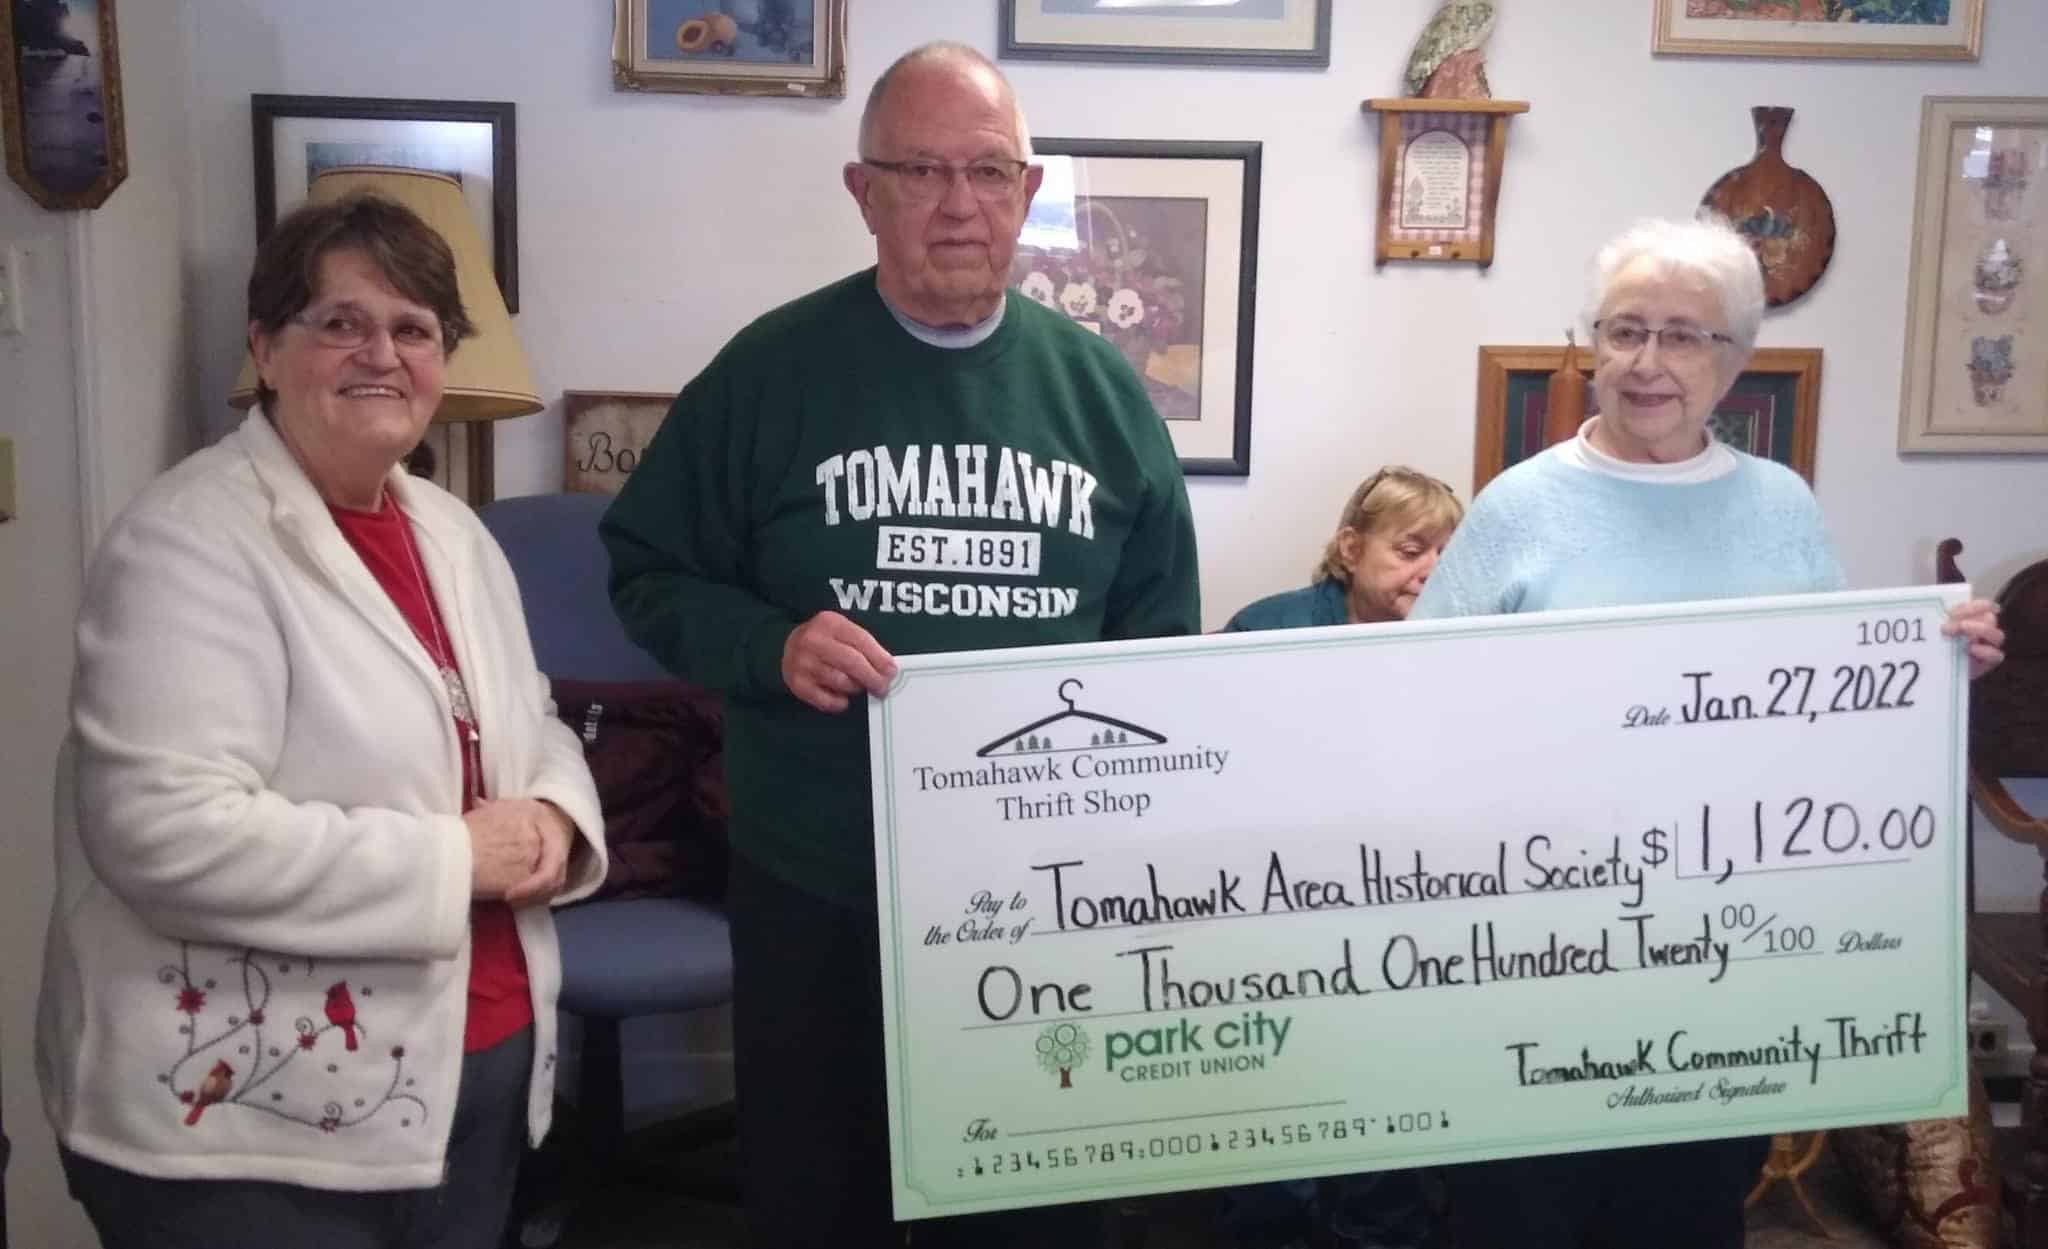 Tomahawk Community Thrift Shop makes donations to five local organizations